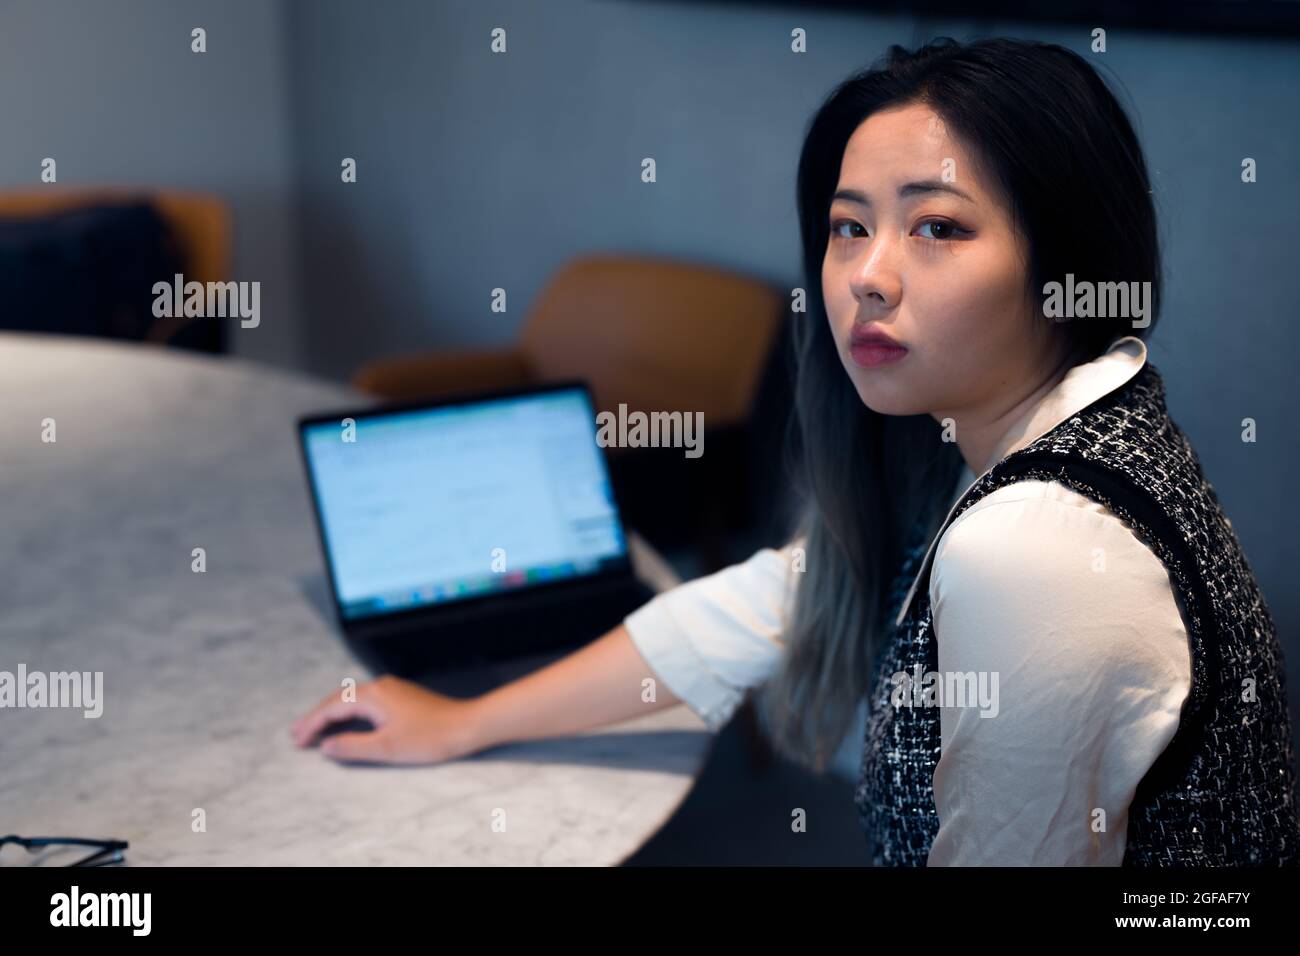 Young Asian Data Scientist Working on Laptop Stock Photo